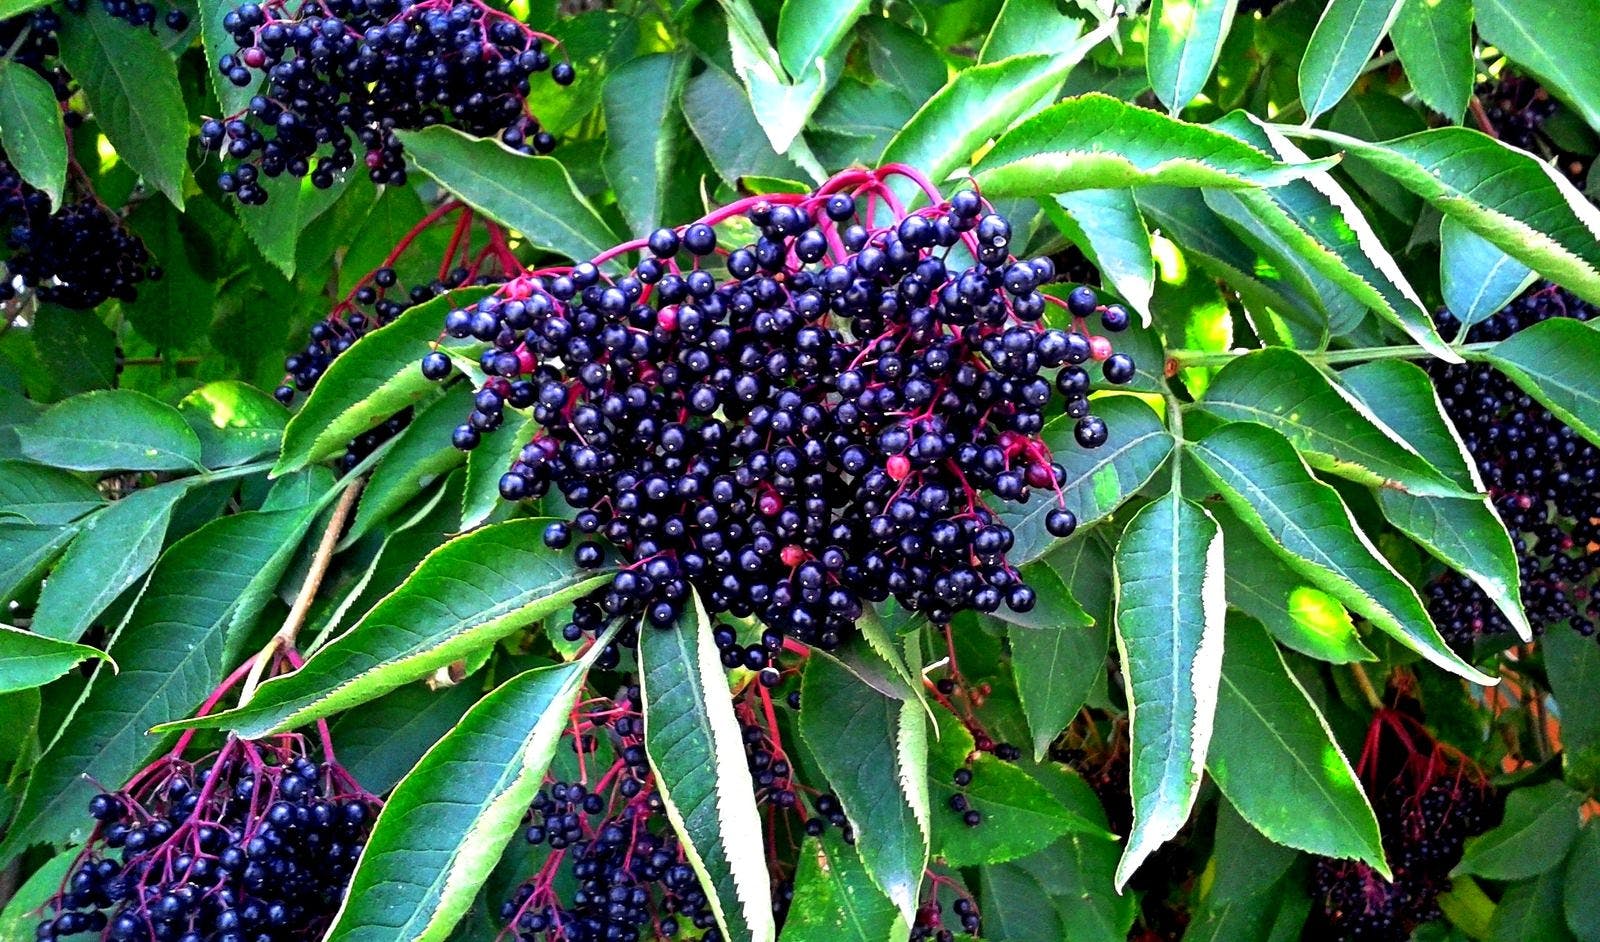 Ripe elderberries, also known as Sambucus berries, growing on a shrub; source of elderberry extract